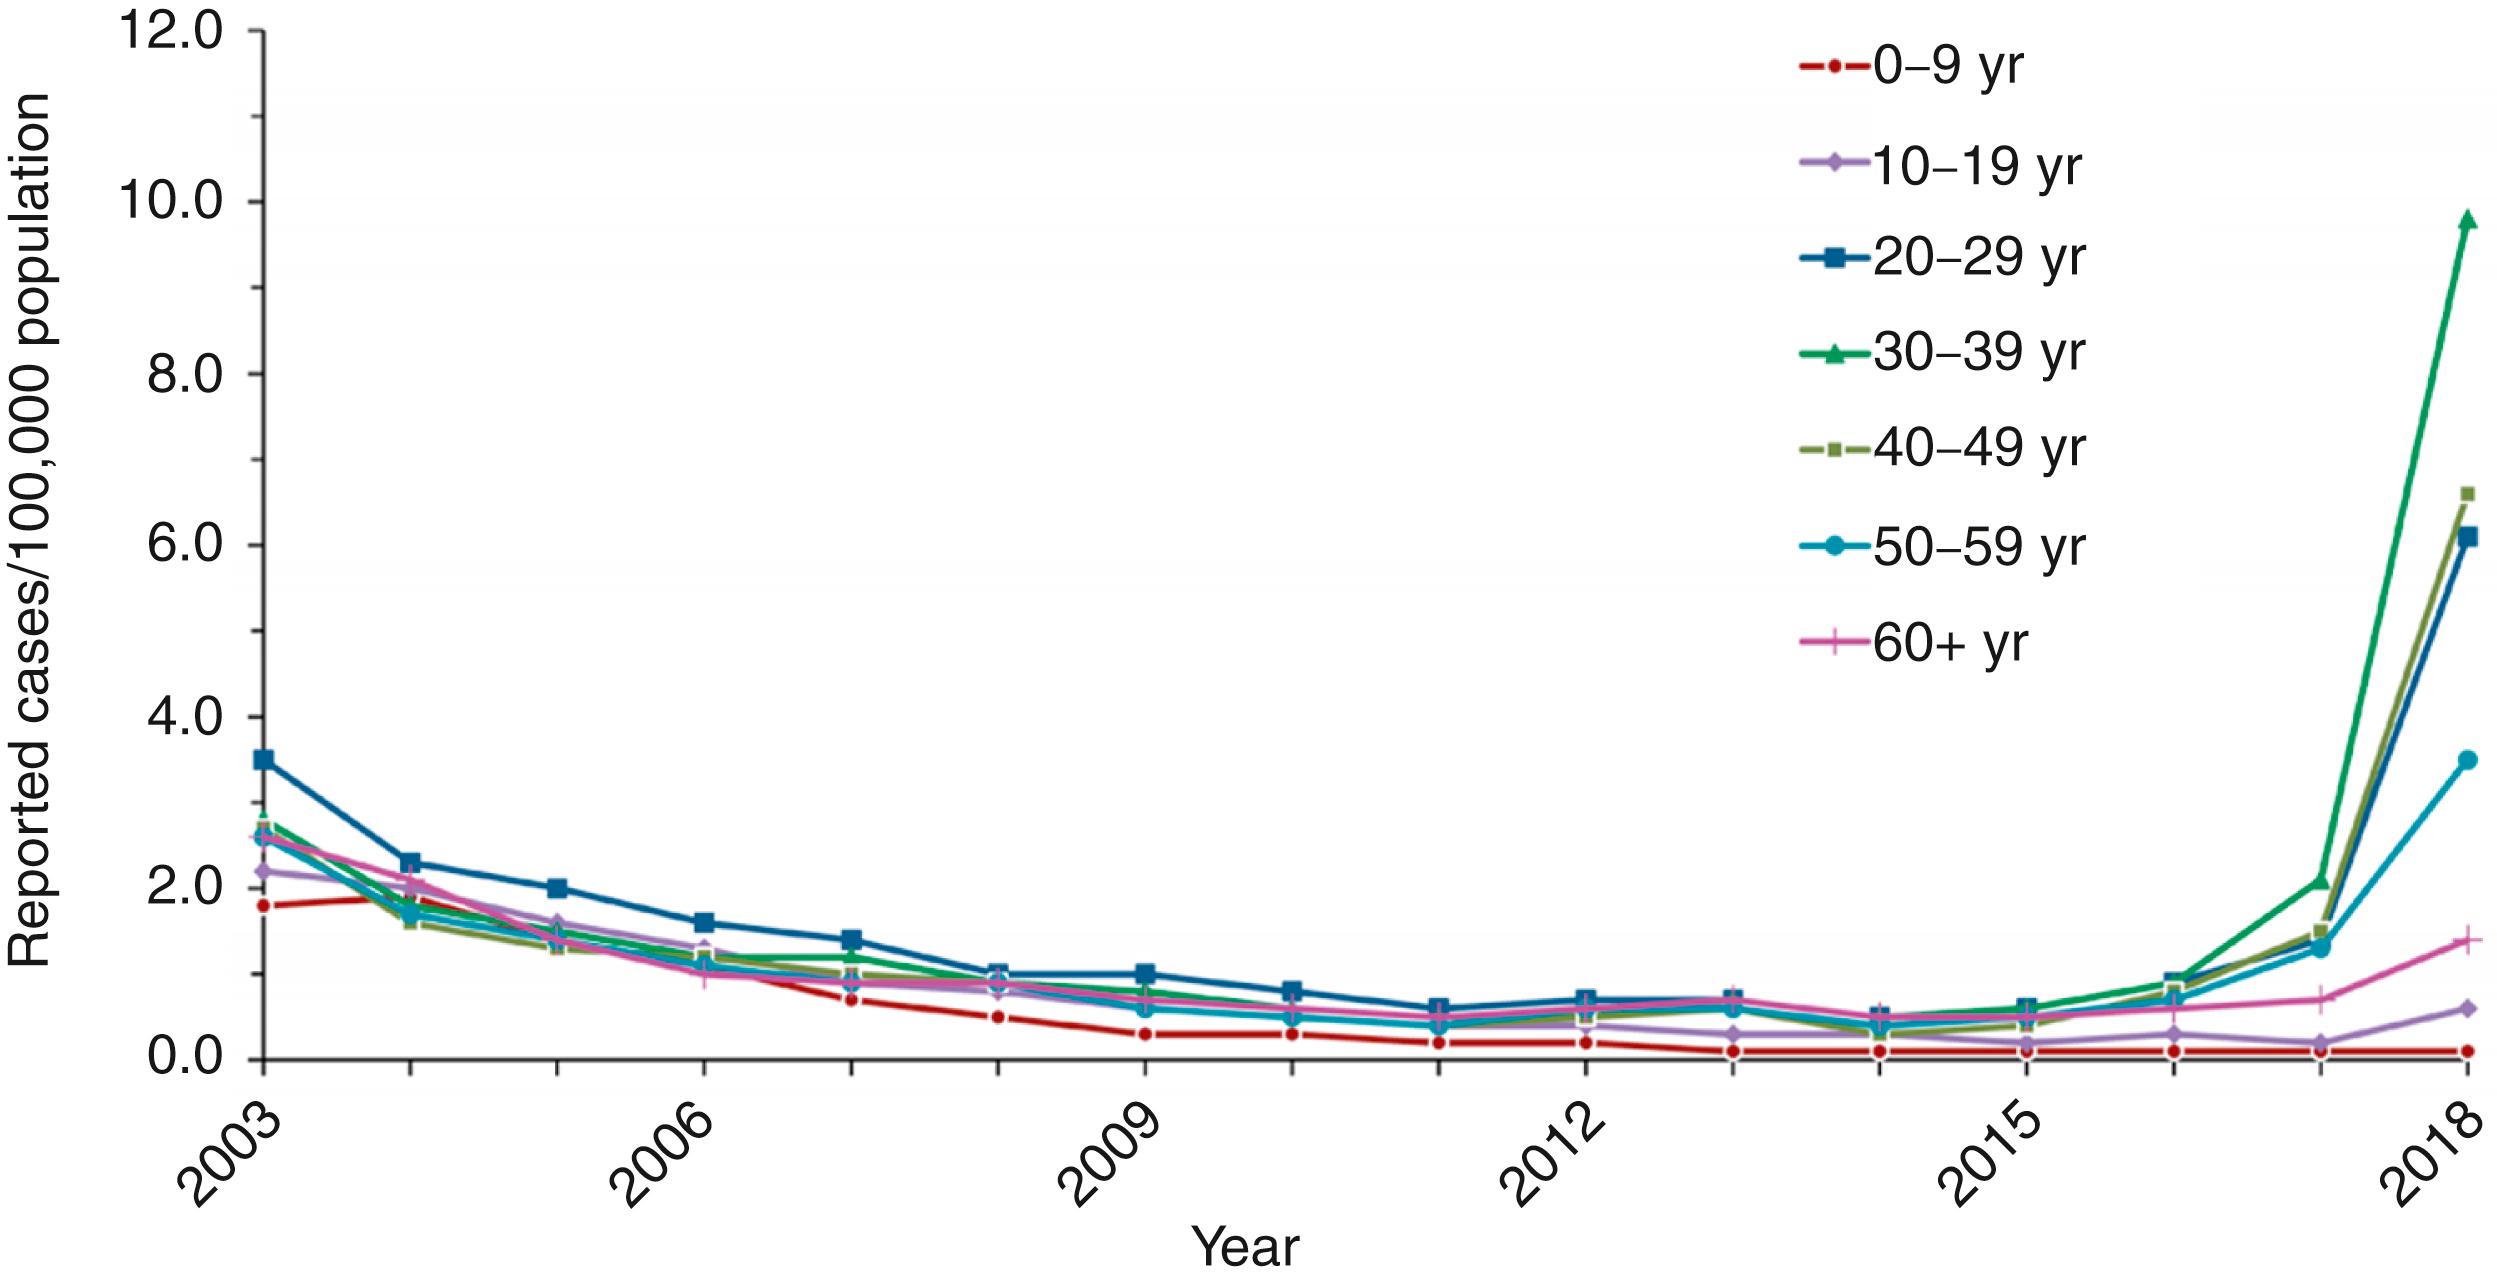 FIGURE 237.2, Incidence per 100,000 population of reported acute hepatitis A, by age group and year, US, 2003–2018.